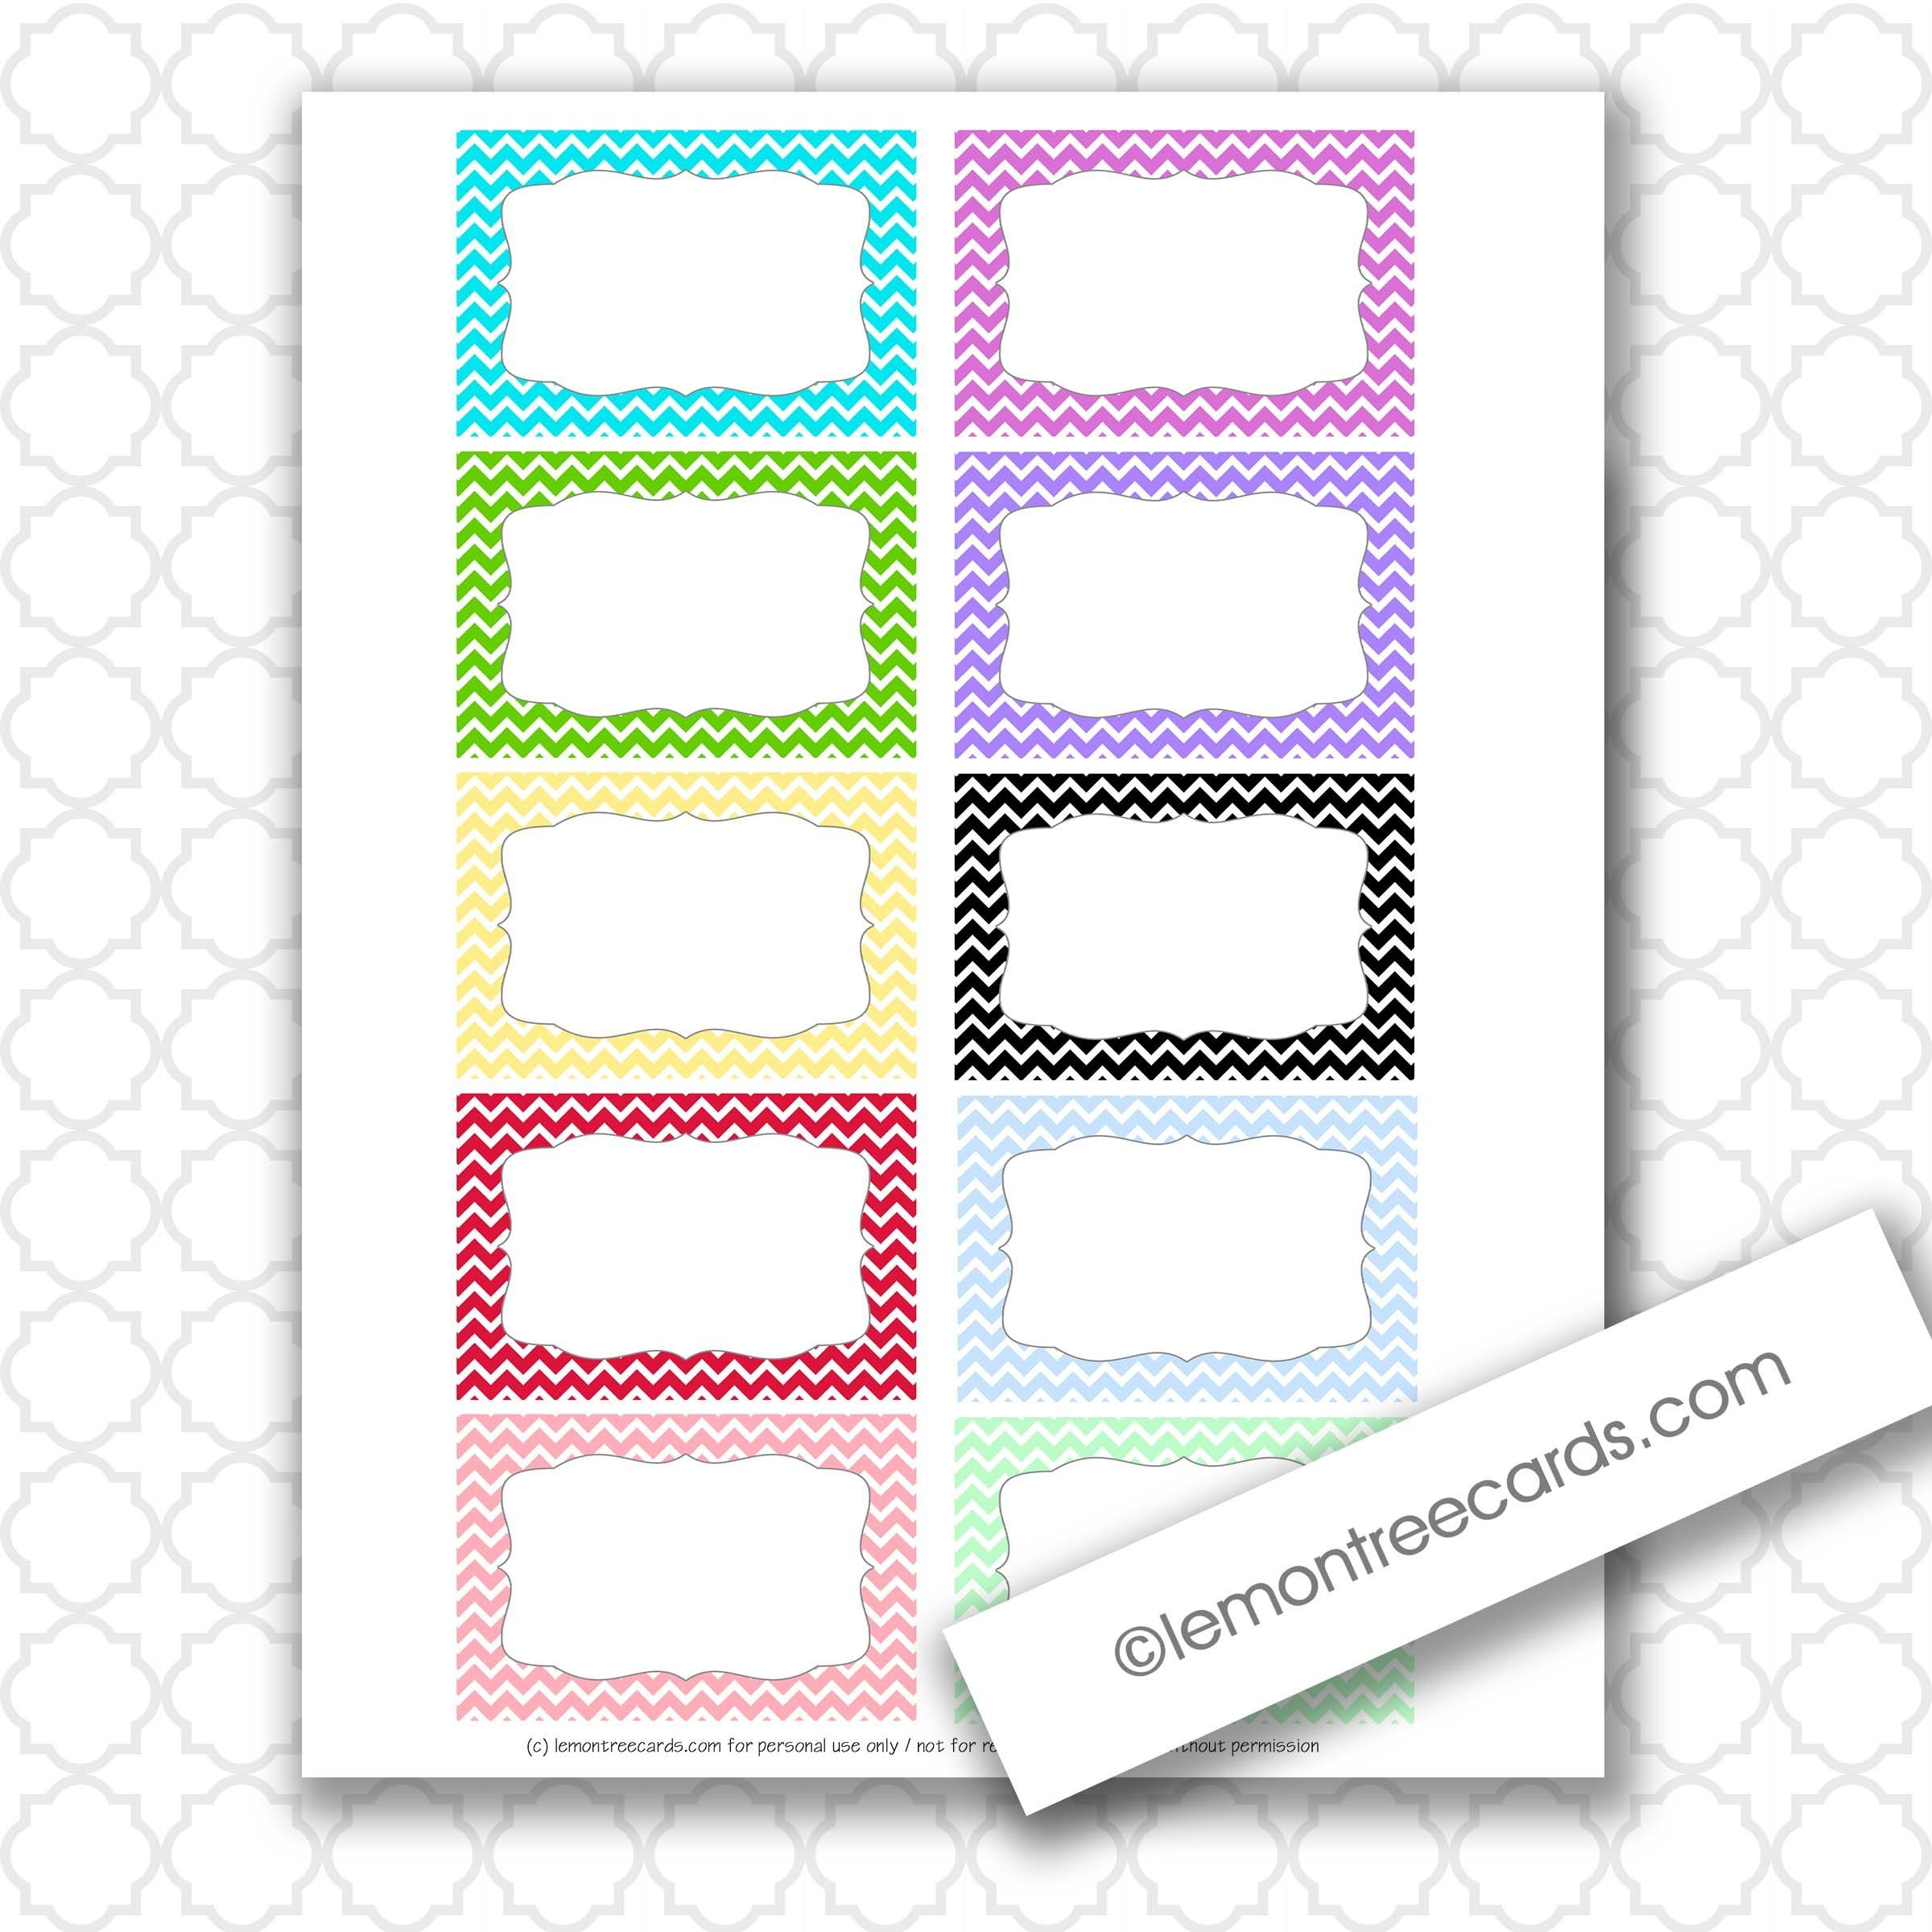 007 Free Index Card Template Ideas Surprising Flashcard Within 3X5 Note Card Template For Word